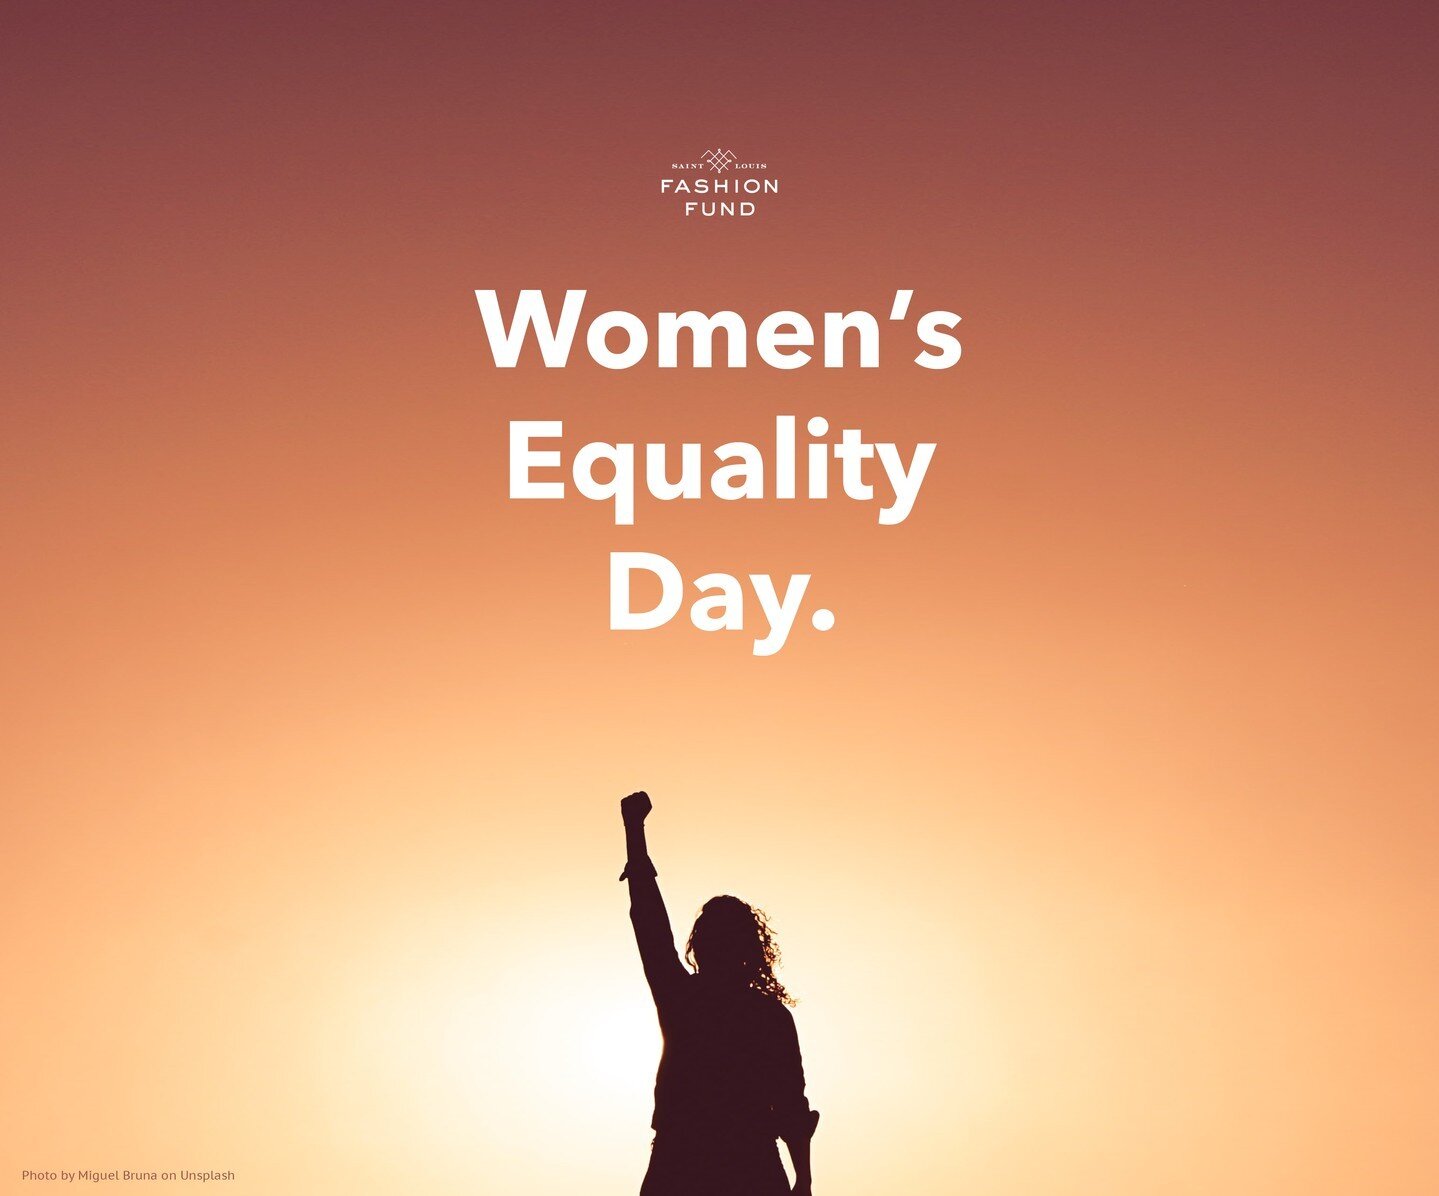 As we celebrate #WomensEqualityDay on the 102nd anniversary of women winning the right to vote, we know the fight isn't over. We are proud to support so many women-owned brands and fashion businesses in the St. Louis region through the Fund's mission